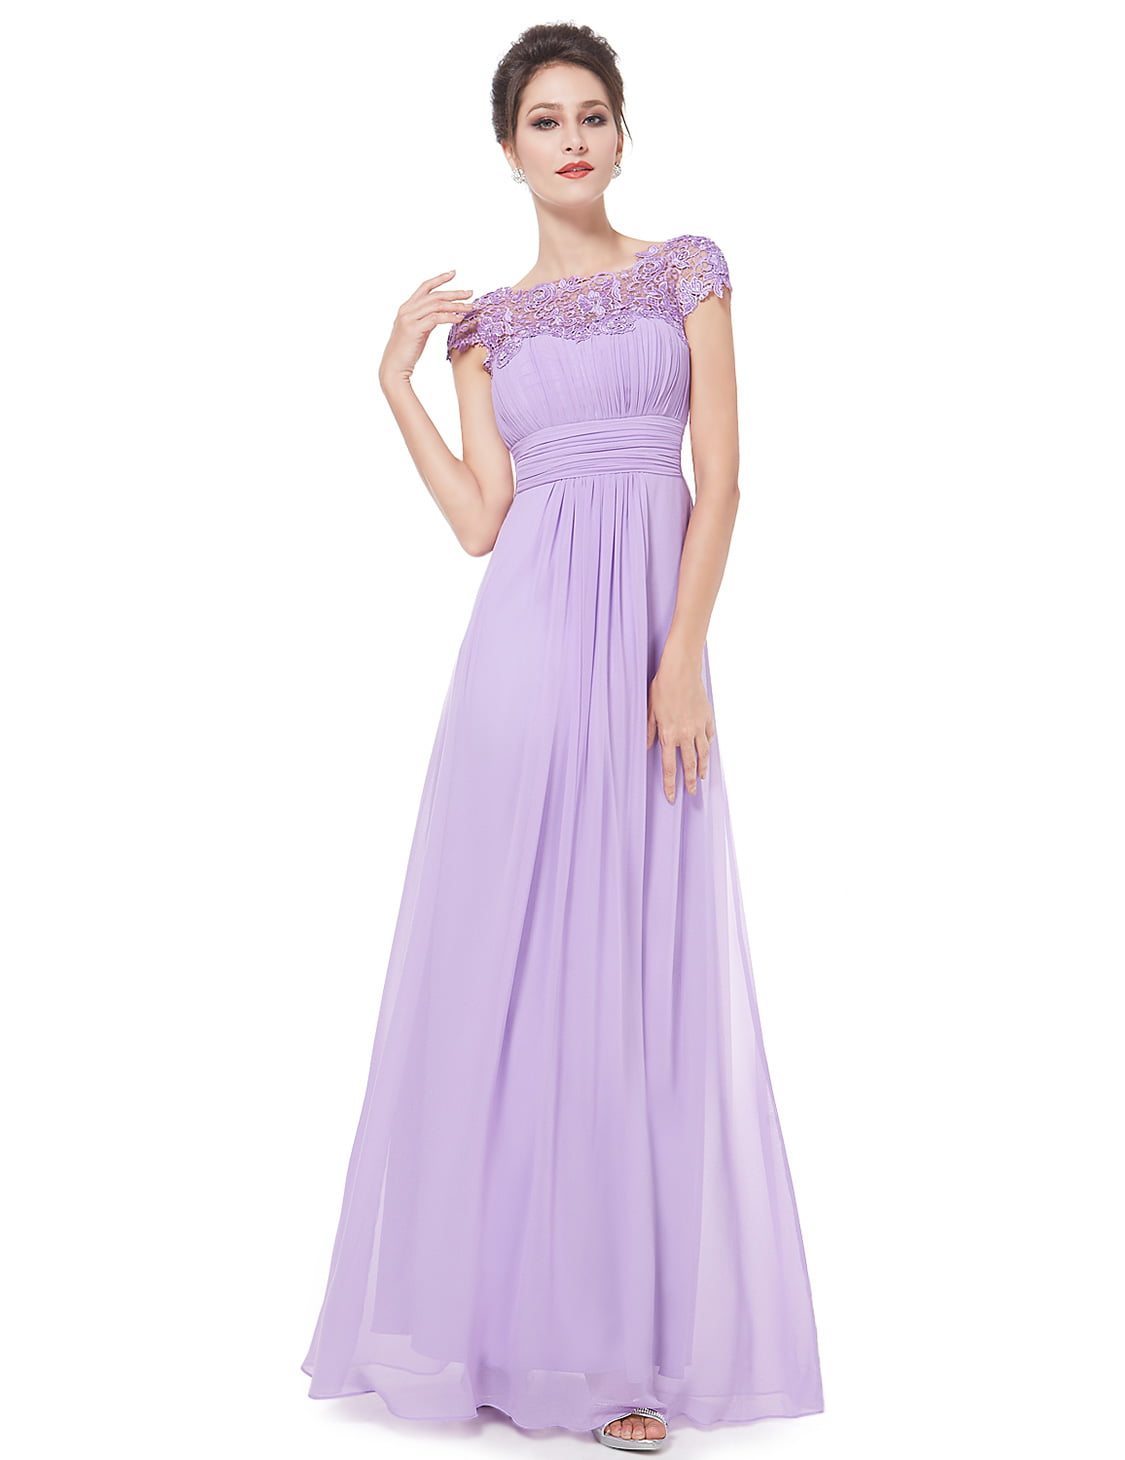 Ever-Pretty Lace Cap Sleeve Long Evening Party Dresses Cocktail Bridesmaid Gowns